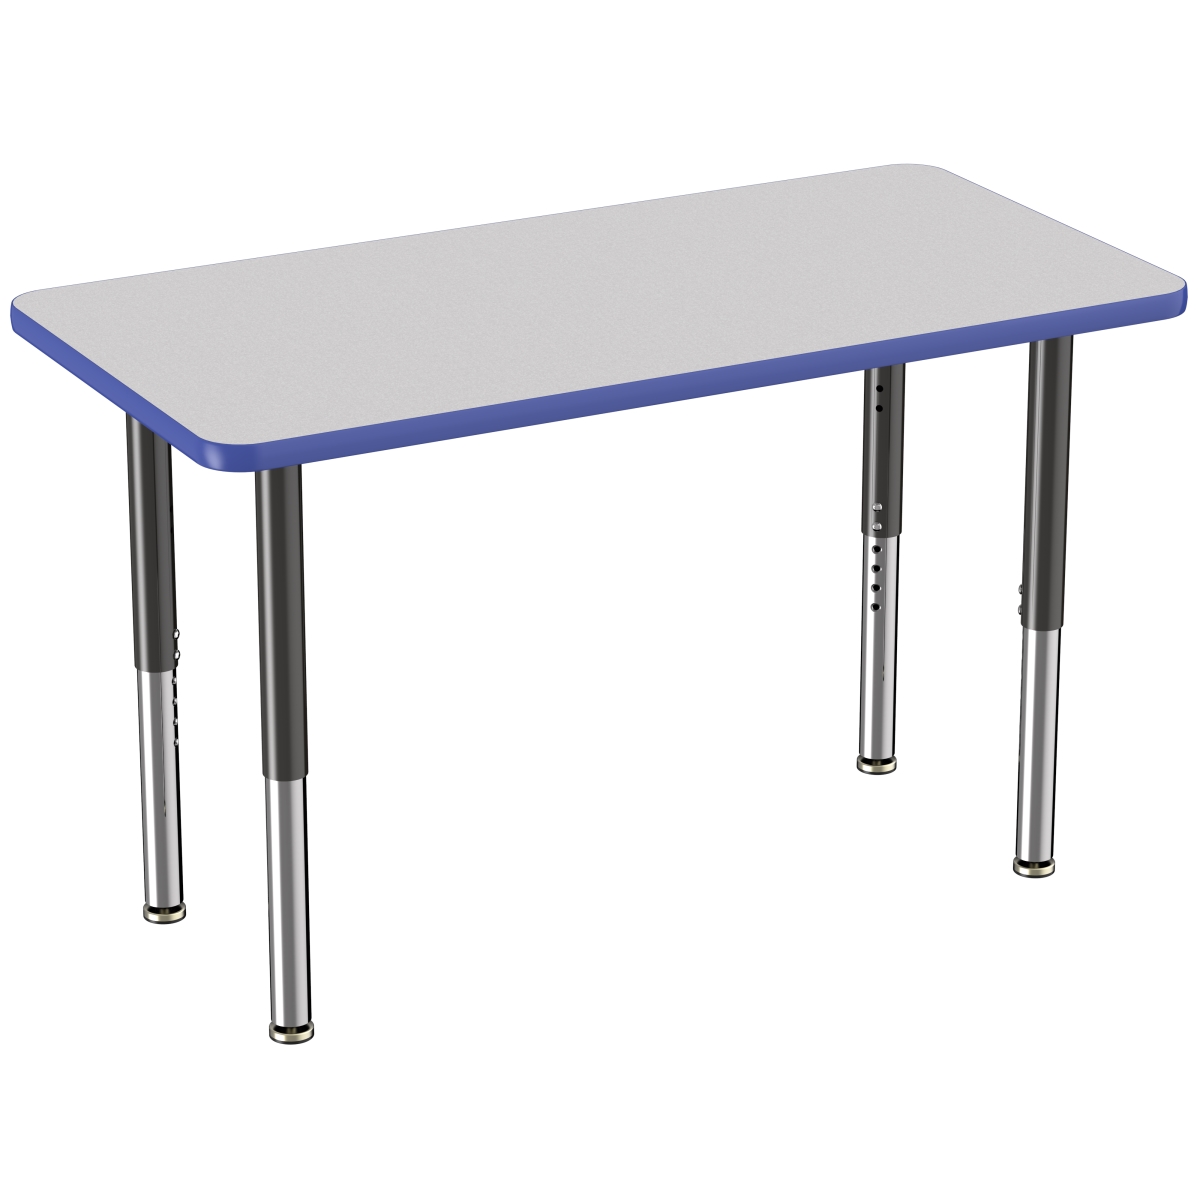 10010-gybl 24 X 48 In. Rectangle T-mold Adjustable Activity Table With Super Leg - Grey & Blue